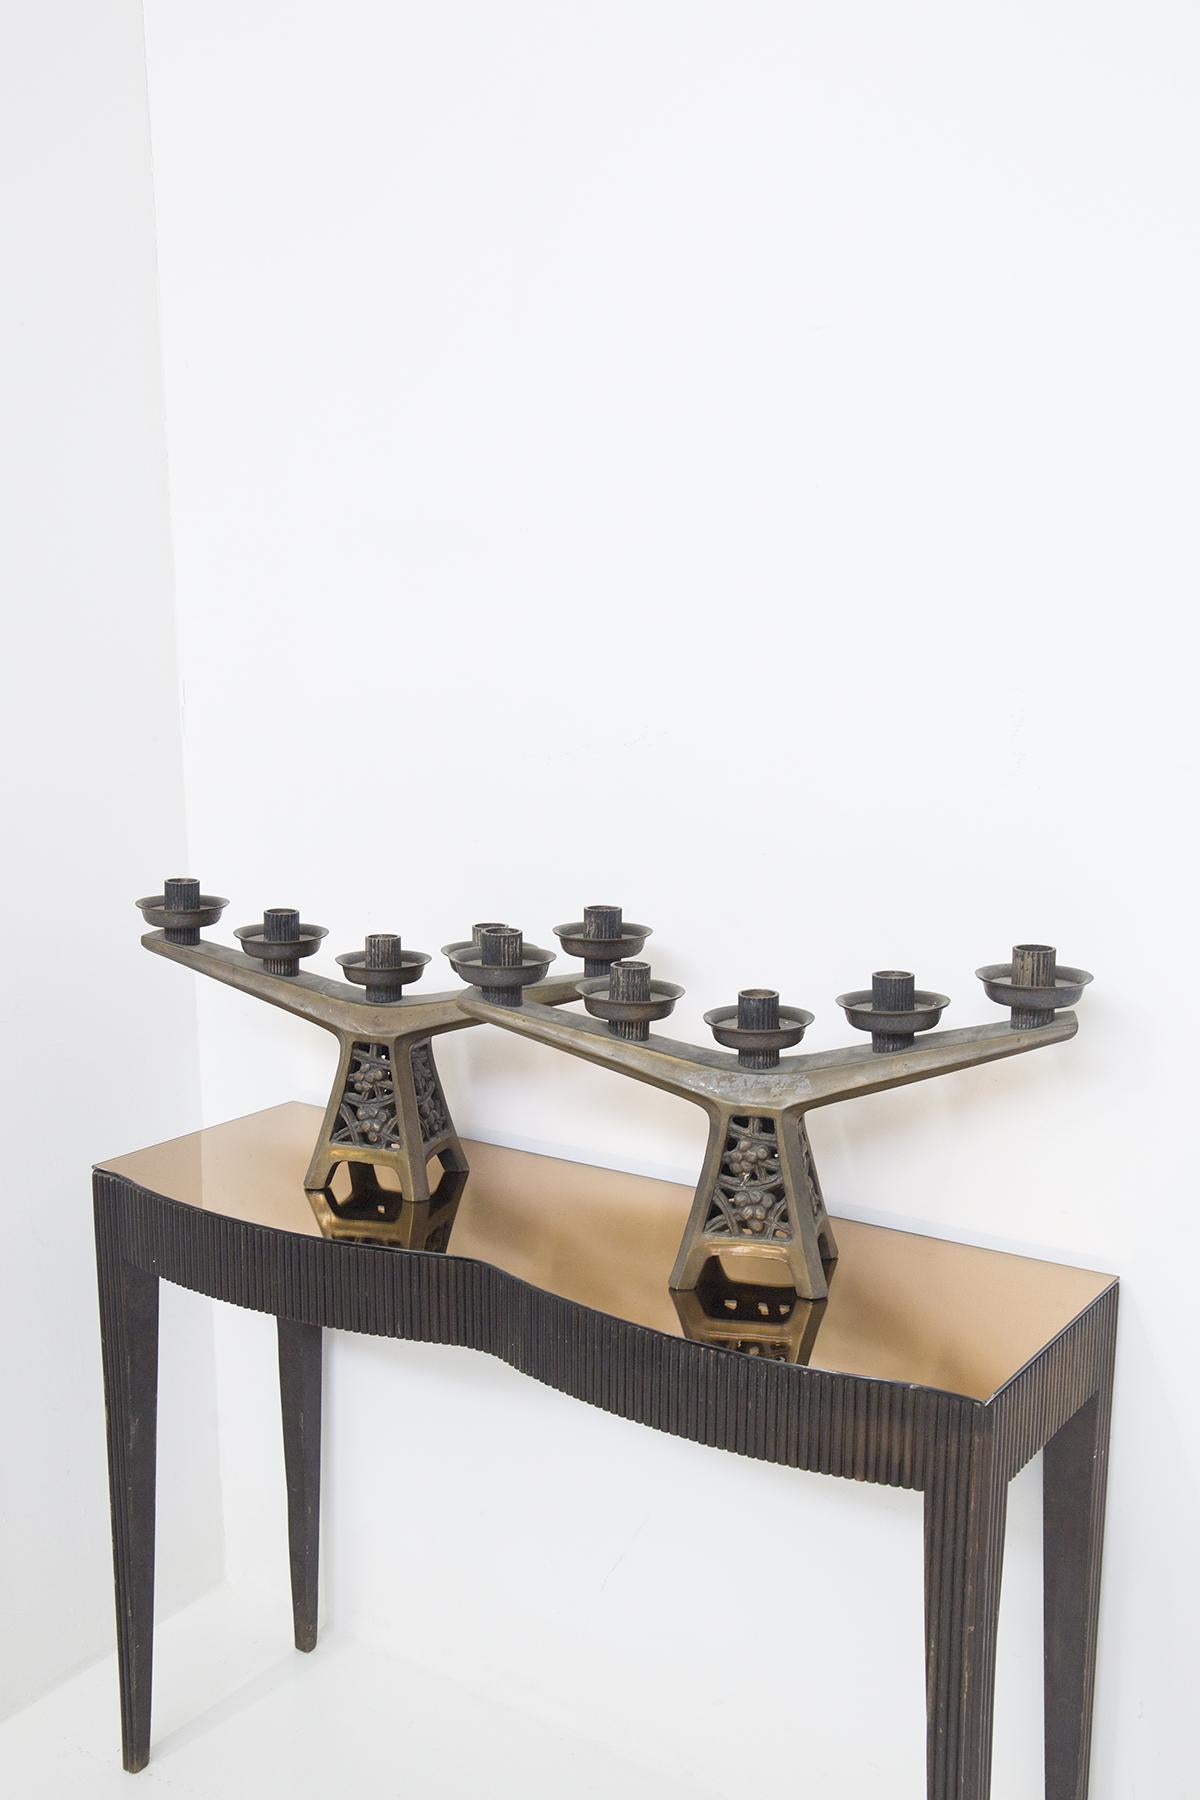 Beautiful pair of candelabra dating from the early 1900s, French manufacture.
Made entirely of bronze, they have a tower base, with four square support legs. The base shows real floral decorations, very beautiful. Typical of the old French